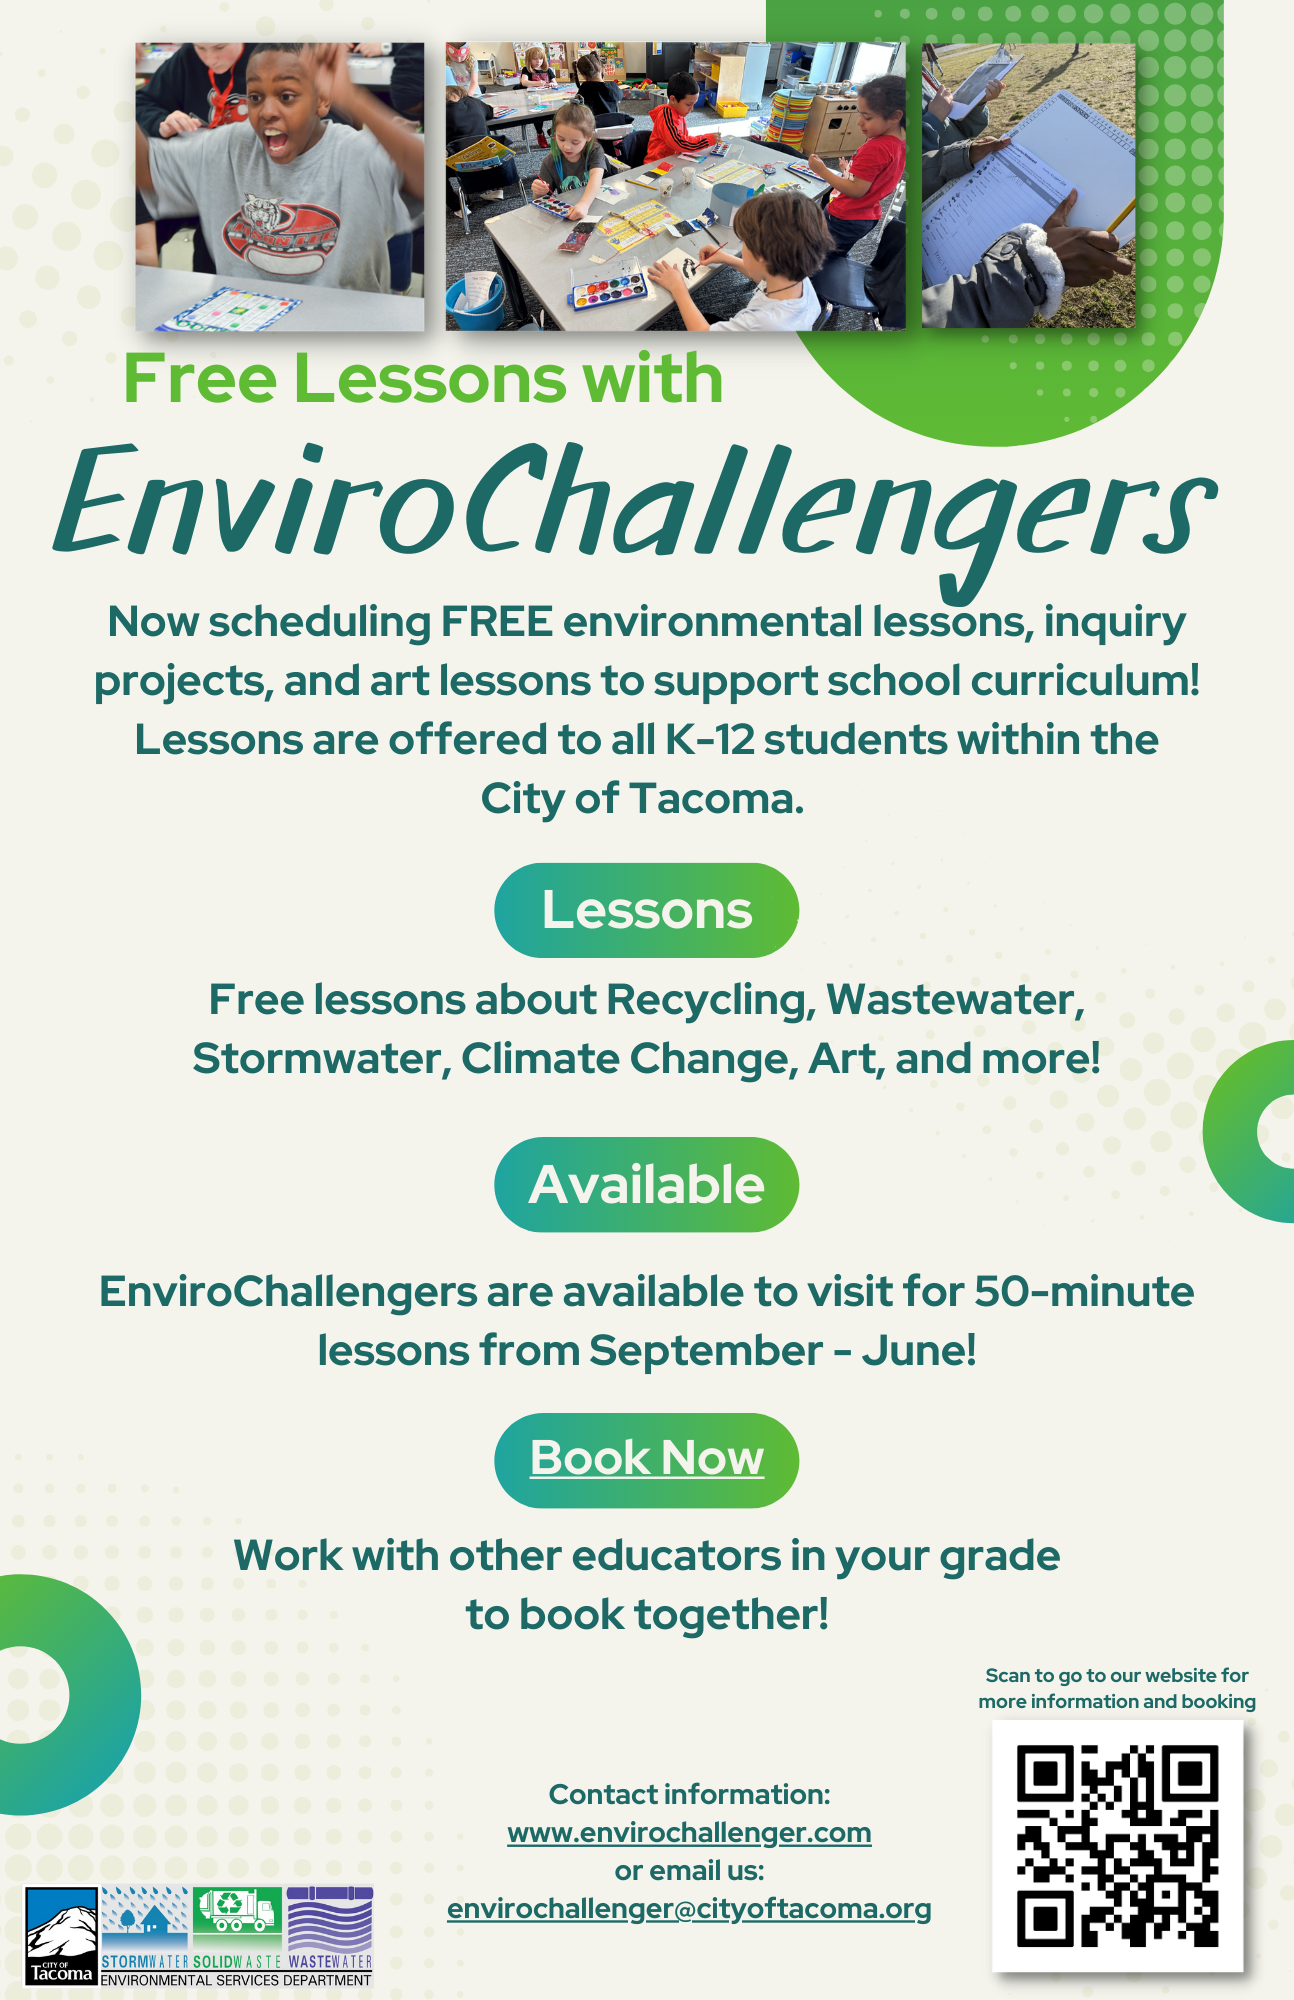 back to school with the EnviroChallengers